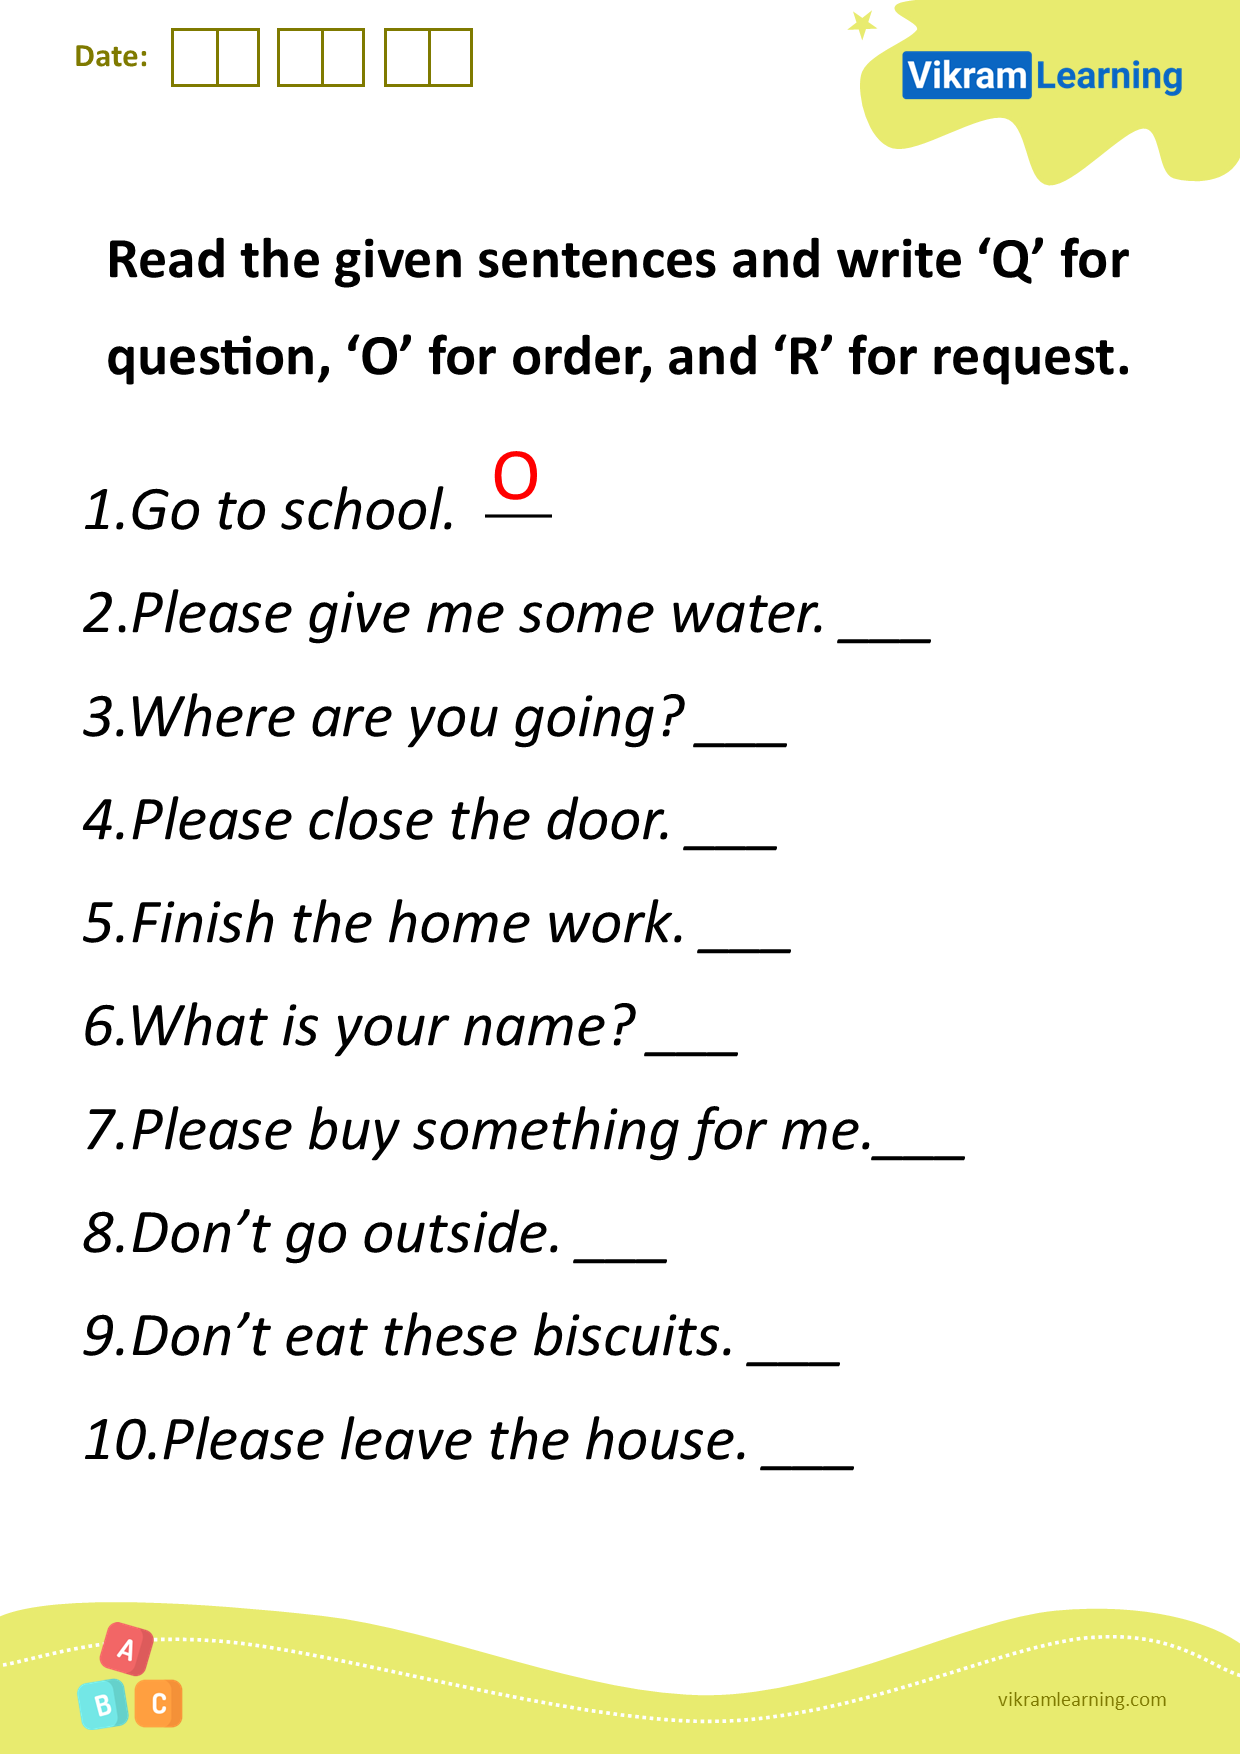 Download read the given sentences and write ‘q’ for the question, ‘o’ for order, and ‘r’ for the request worksheets